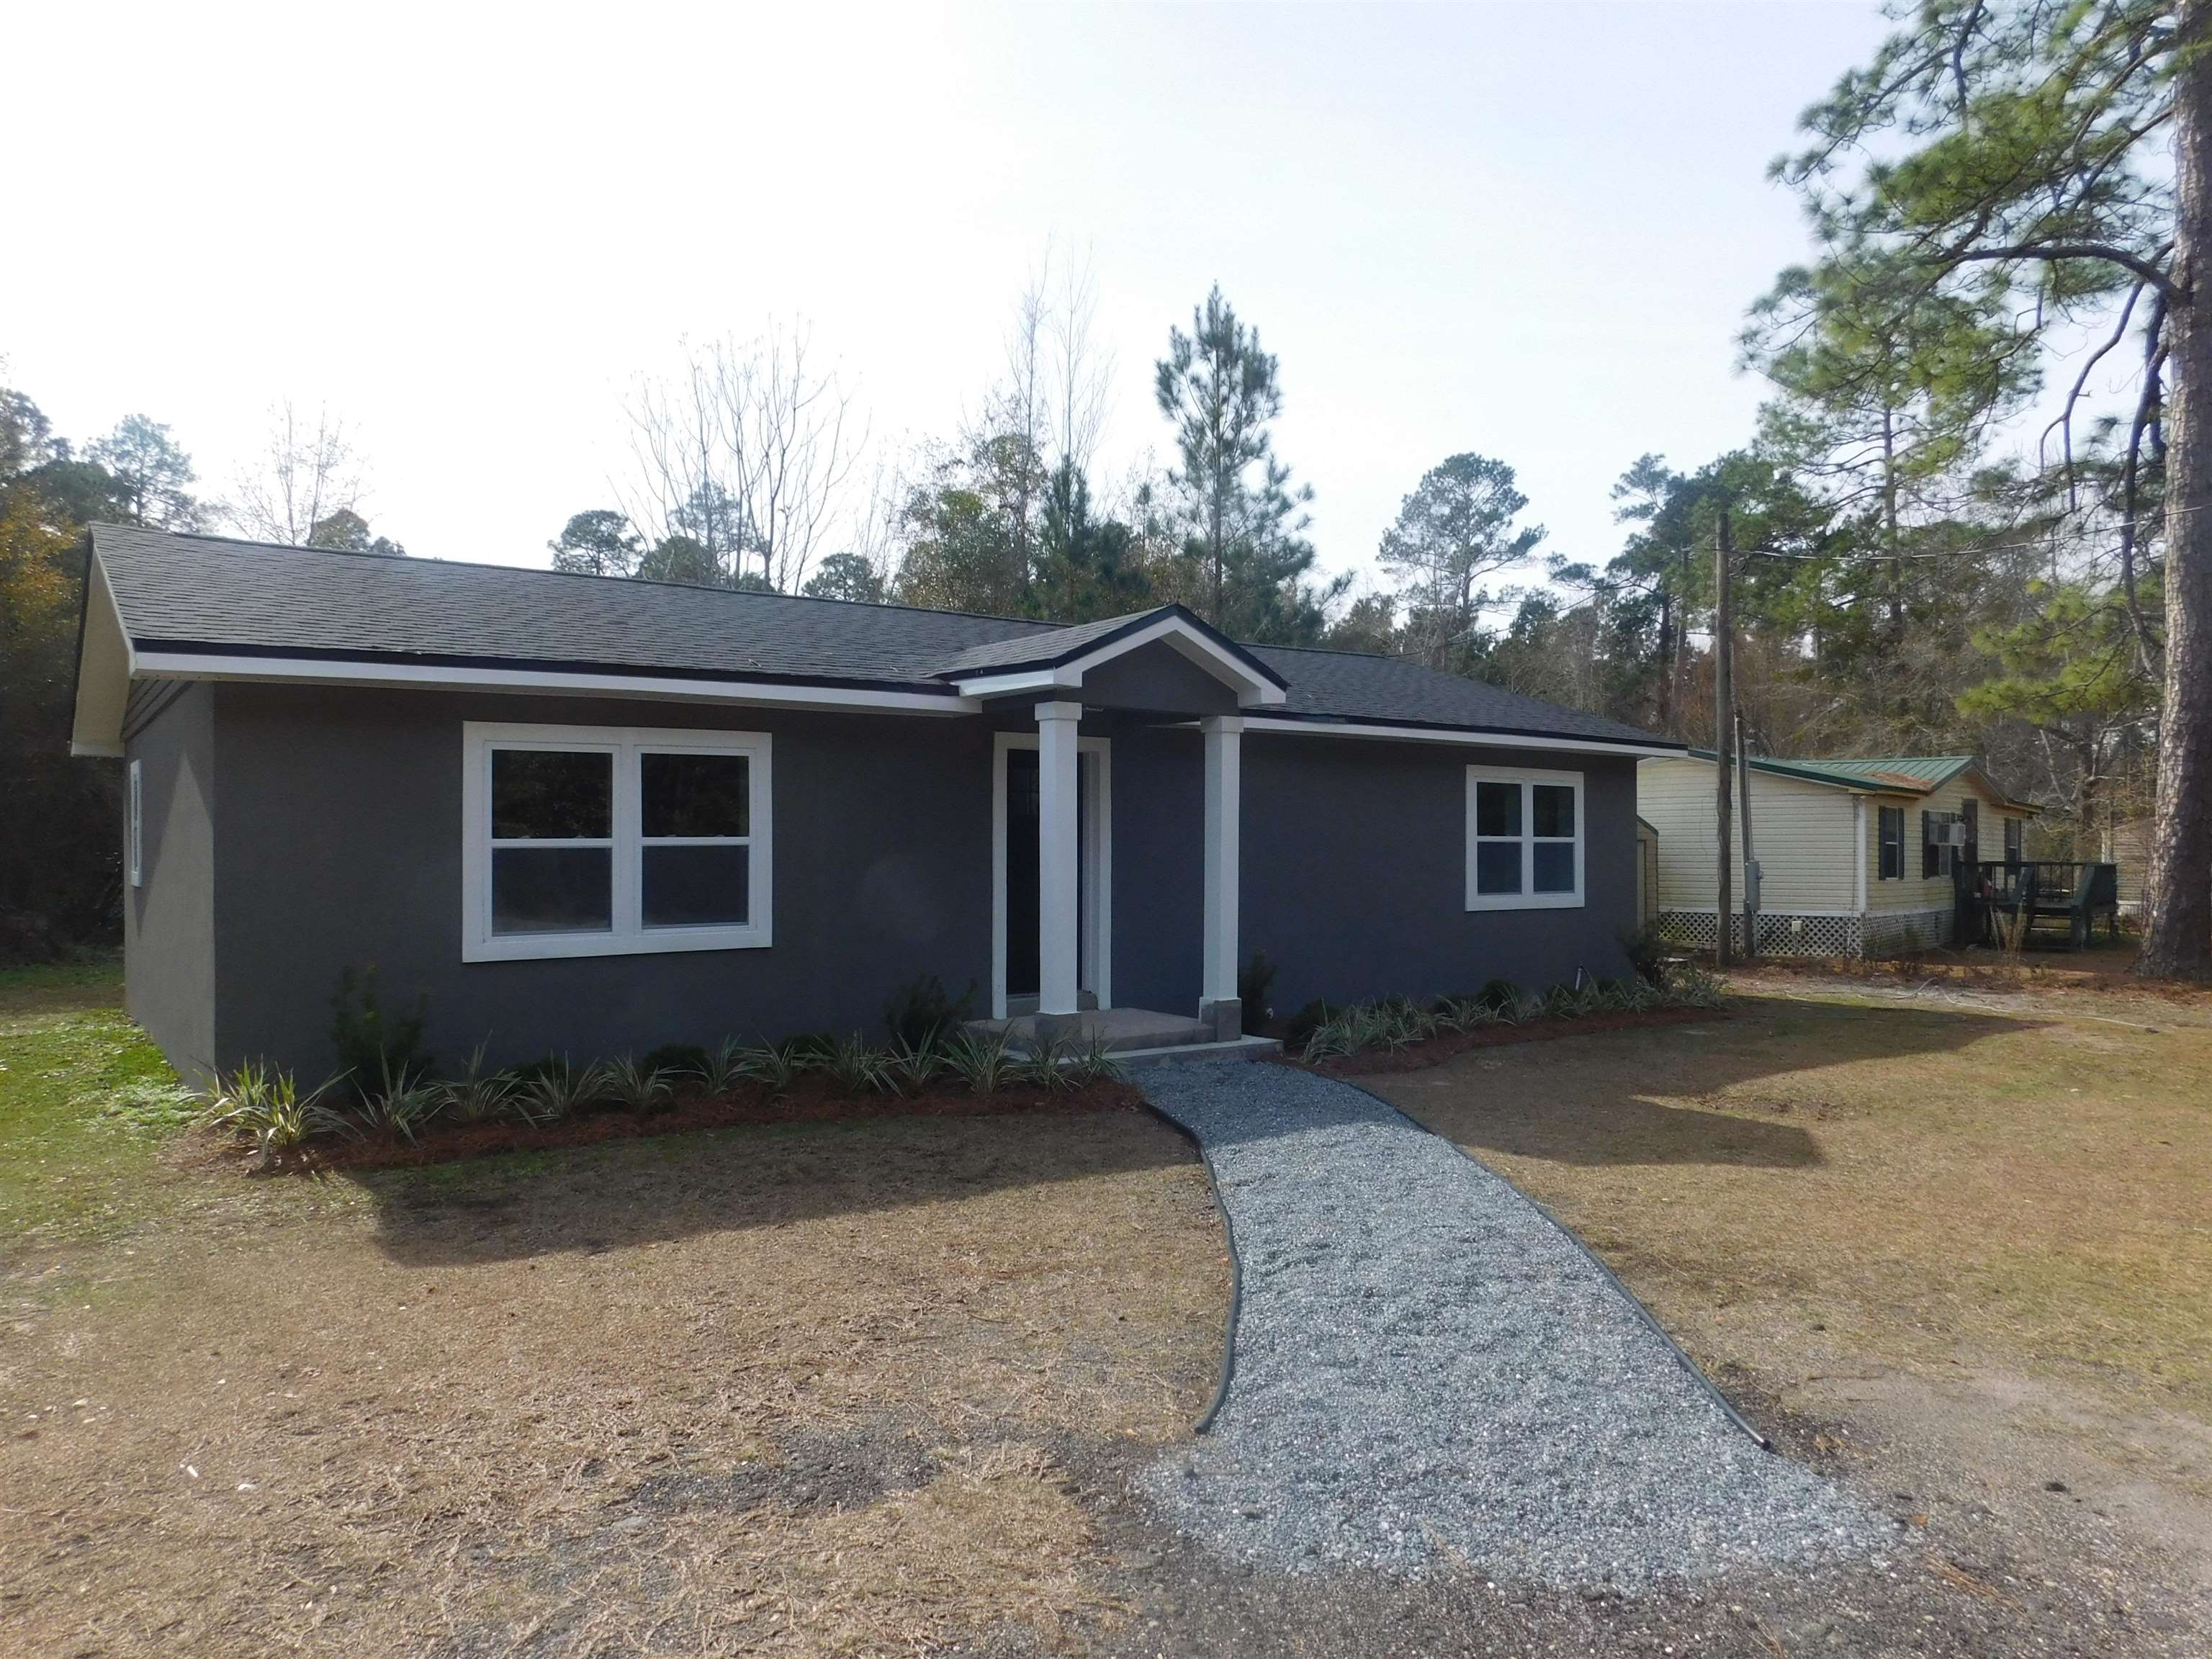 2554 PROVIDENCE Road,QUINCY,Florida 32351-5555,3 Bedrooms Bedrooms,2 BathroomsBathrooms,Detached single family,2554 PROVIDENCE Road,368030